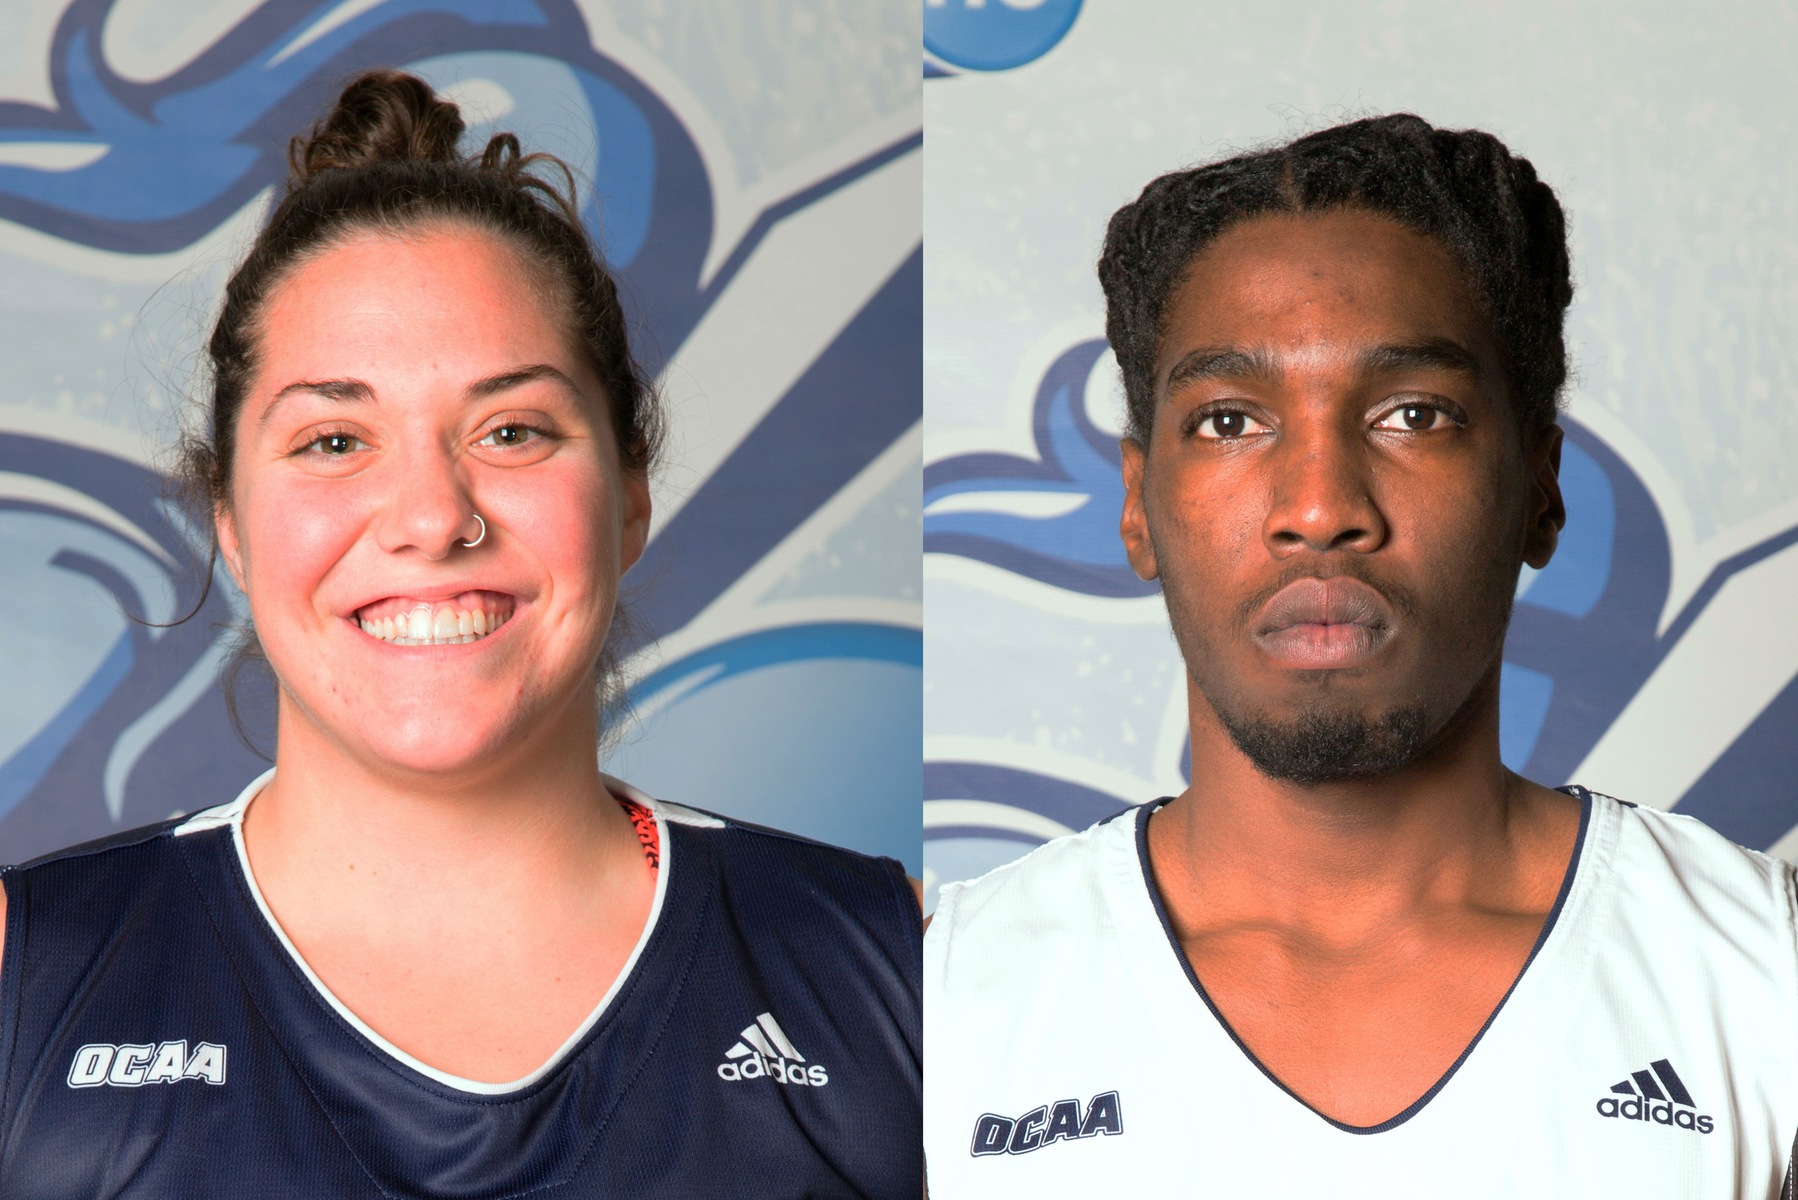 McPherson and Hutchinson Jr. Named Athletes of the Week